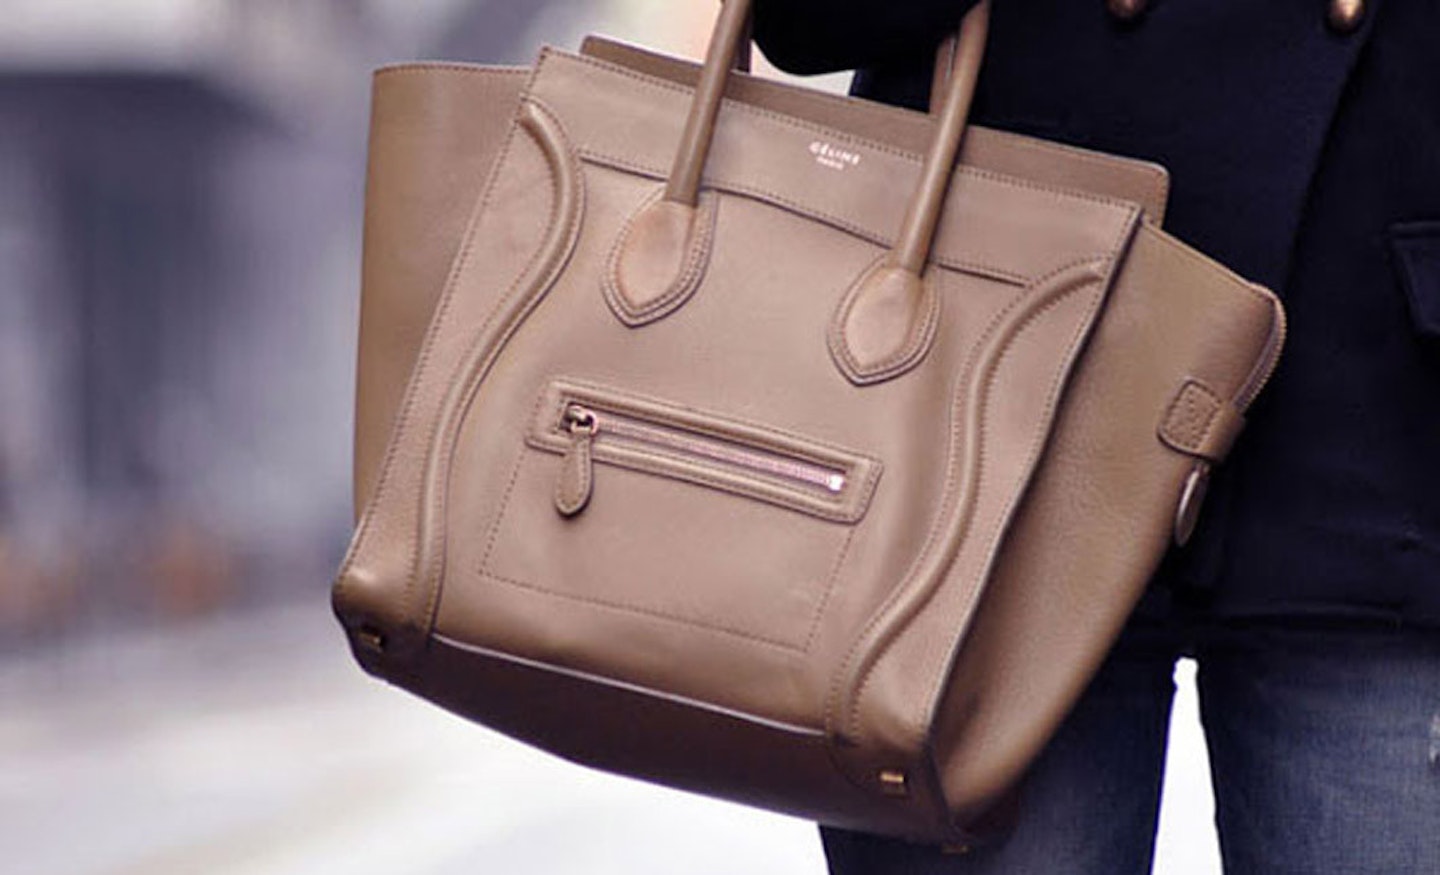 The Celine Luggage Bag Confirms ‘It’ Status With Booming Sales Reported ...